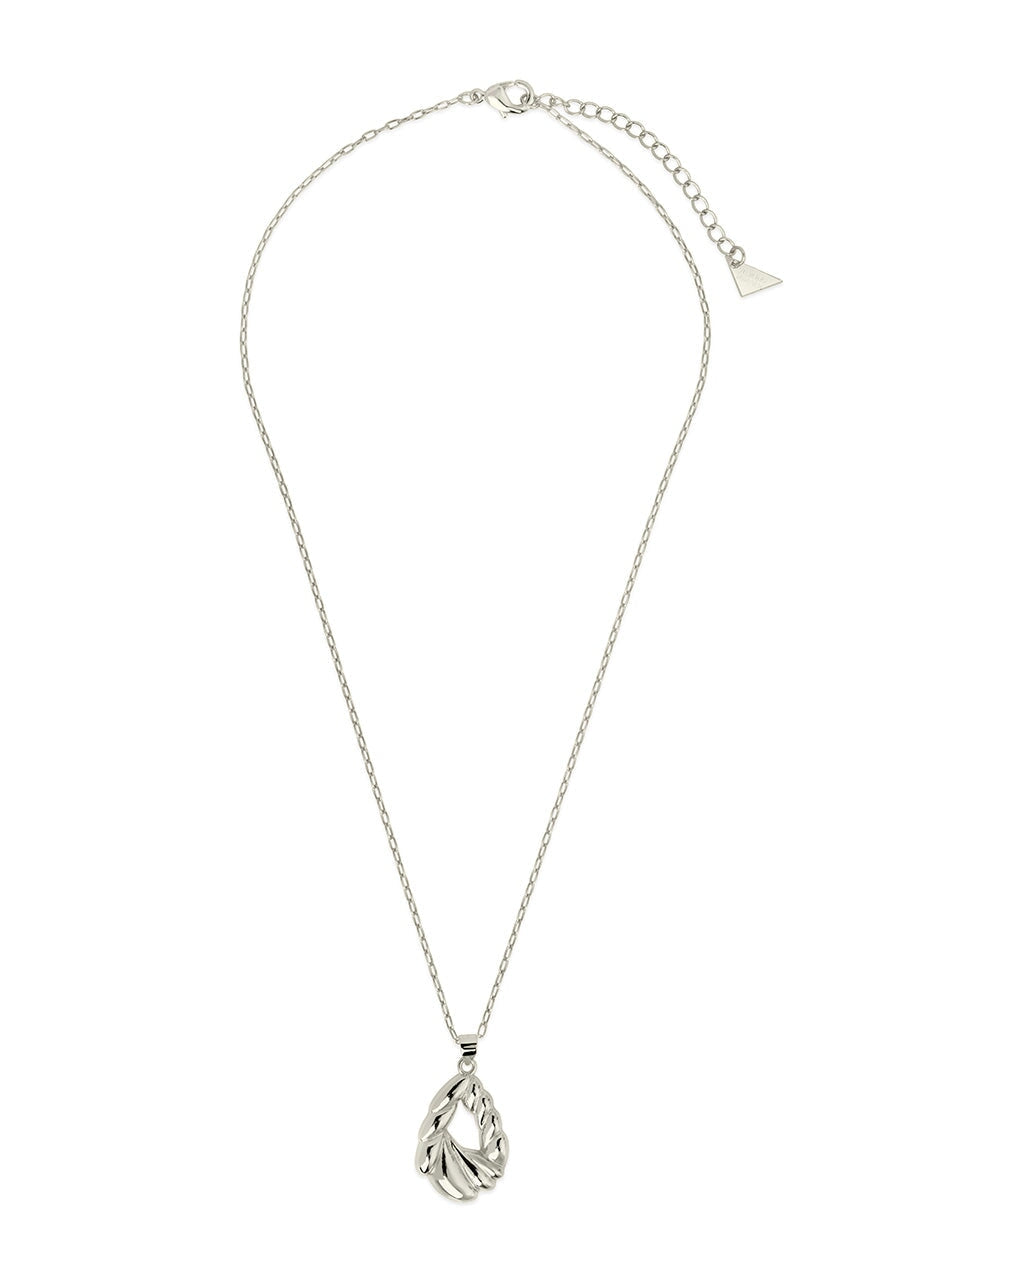 Alouette Pendant Necklace Sterling Forever 